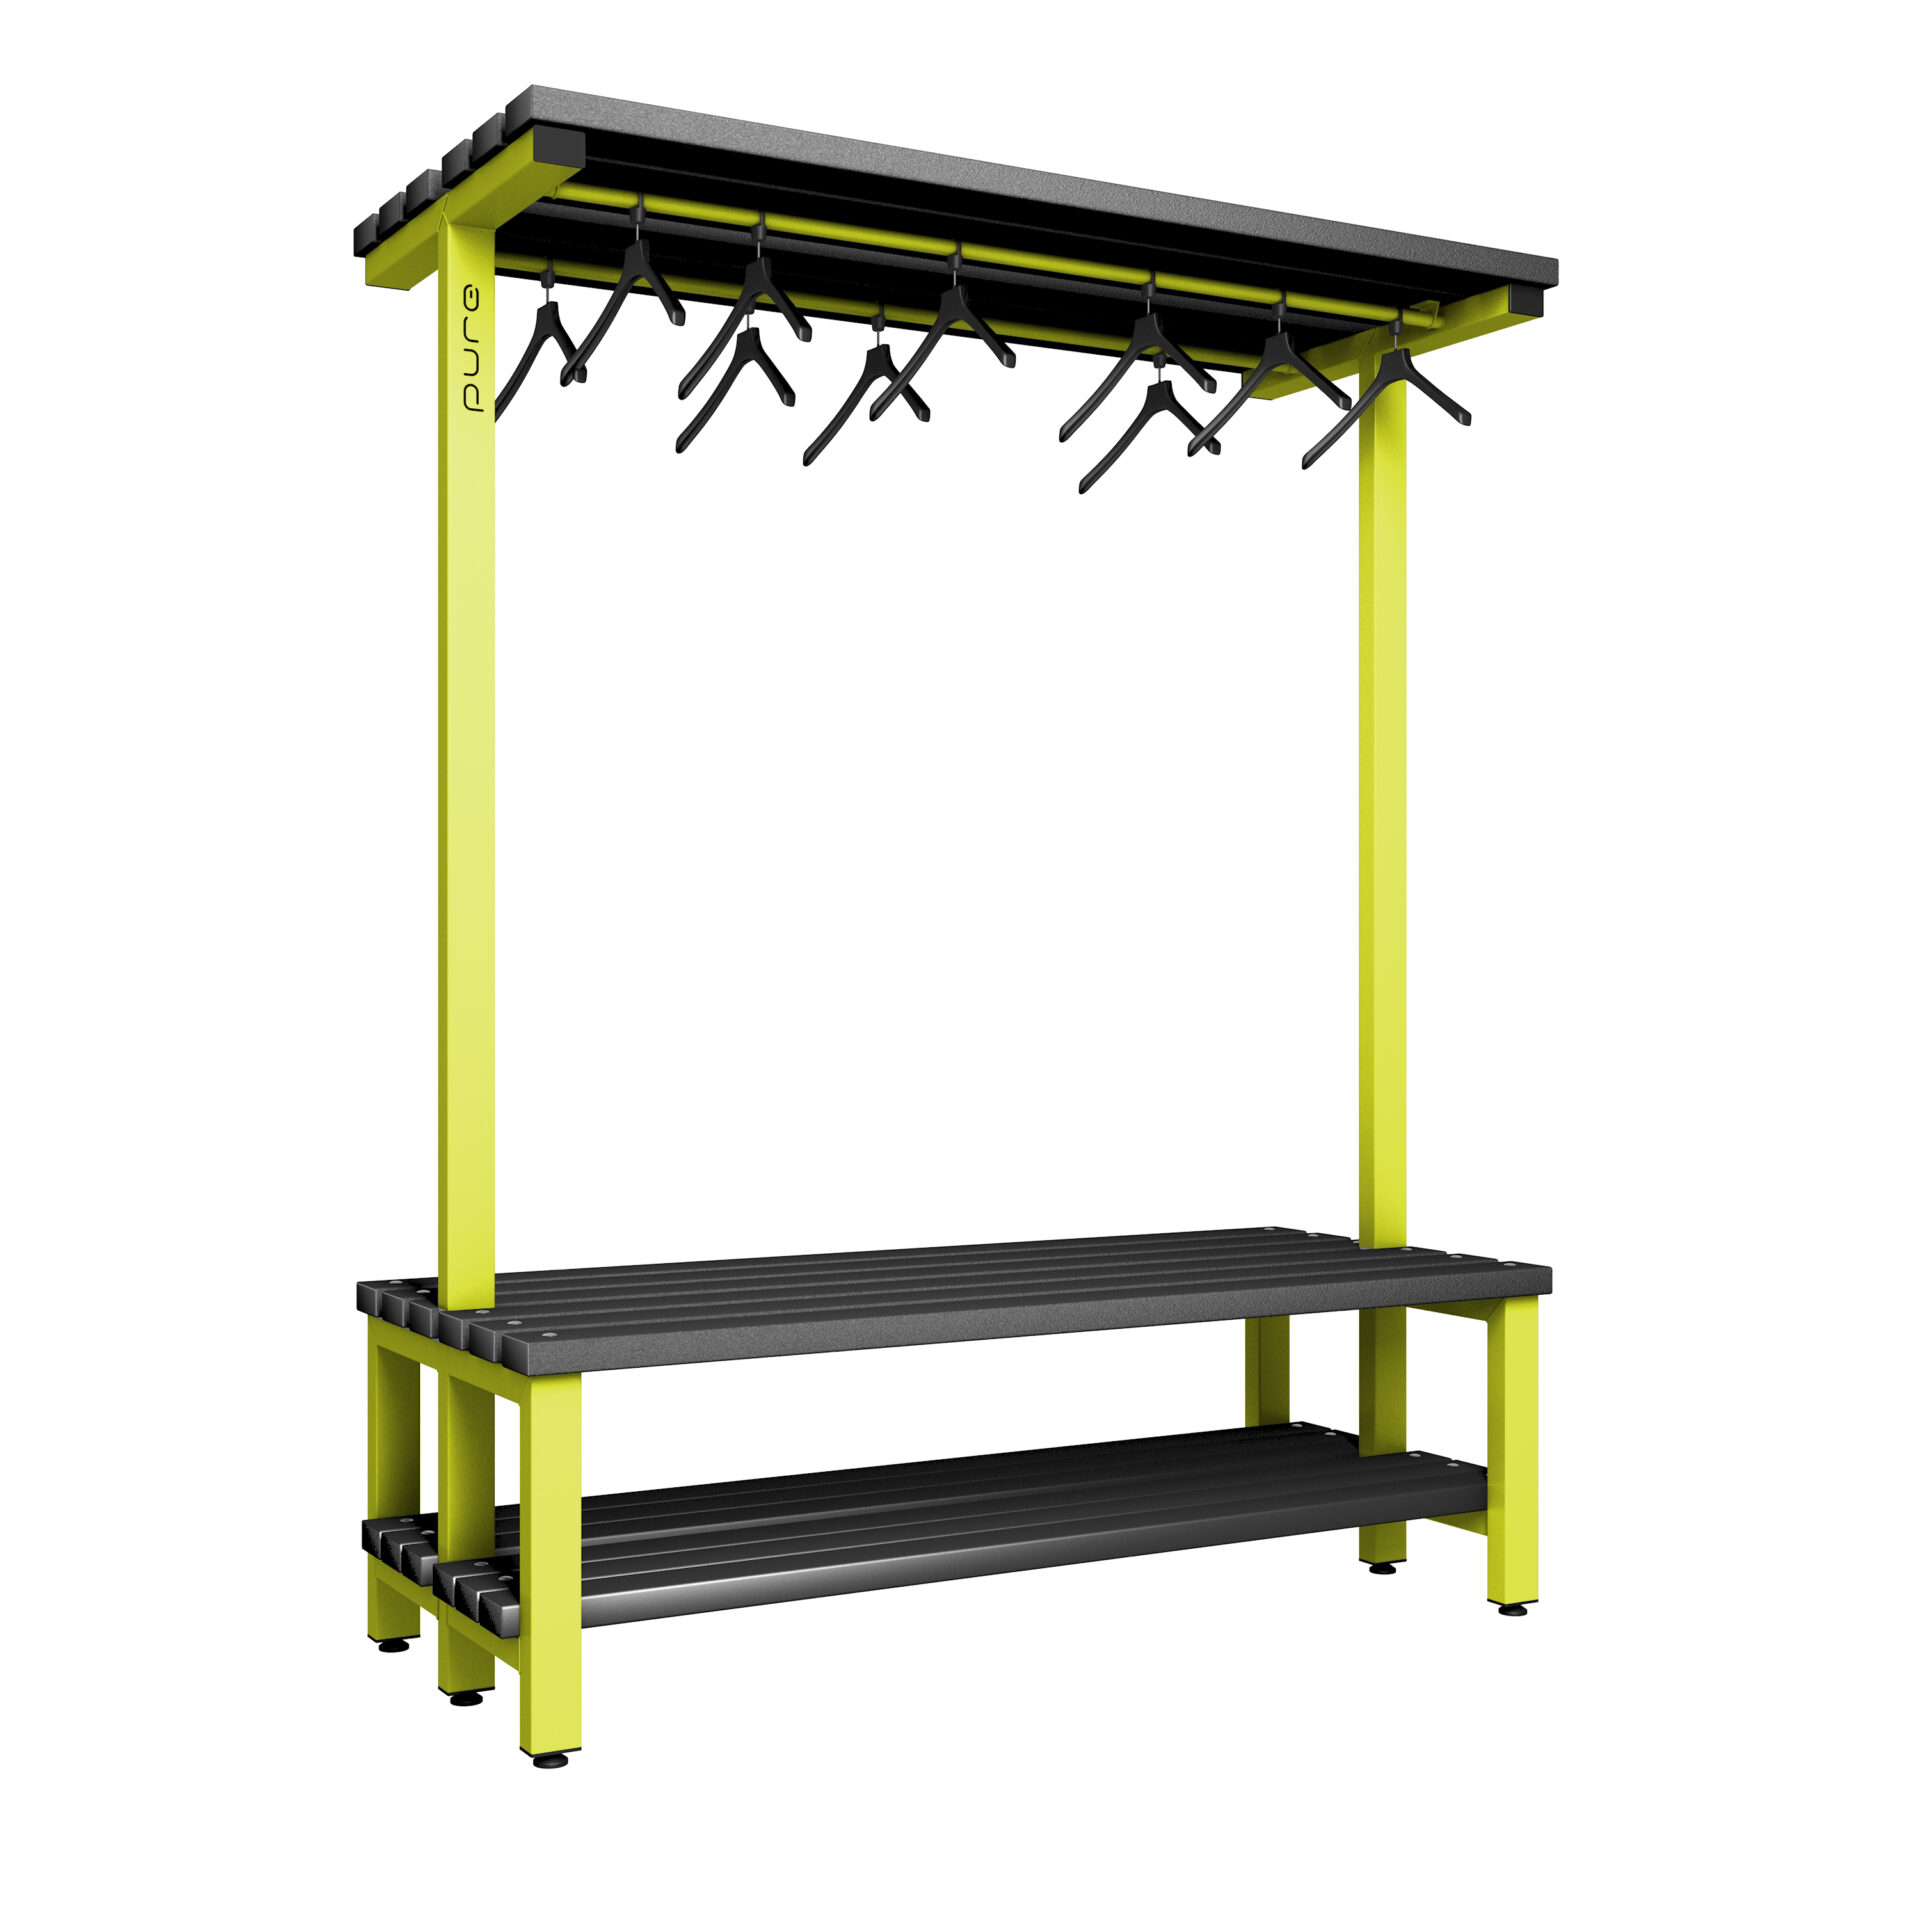 Pure Carbon Zero Double Sided 1500mm Overhead Hanging Bench With Shoe Shelf